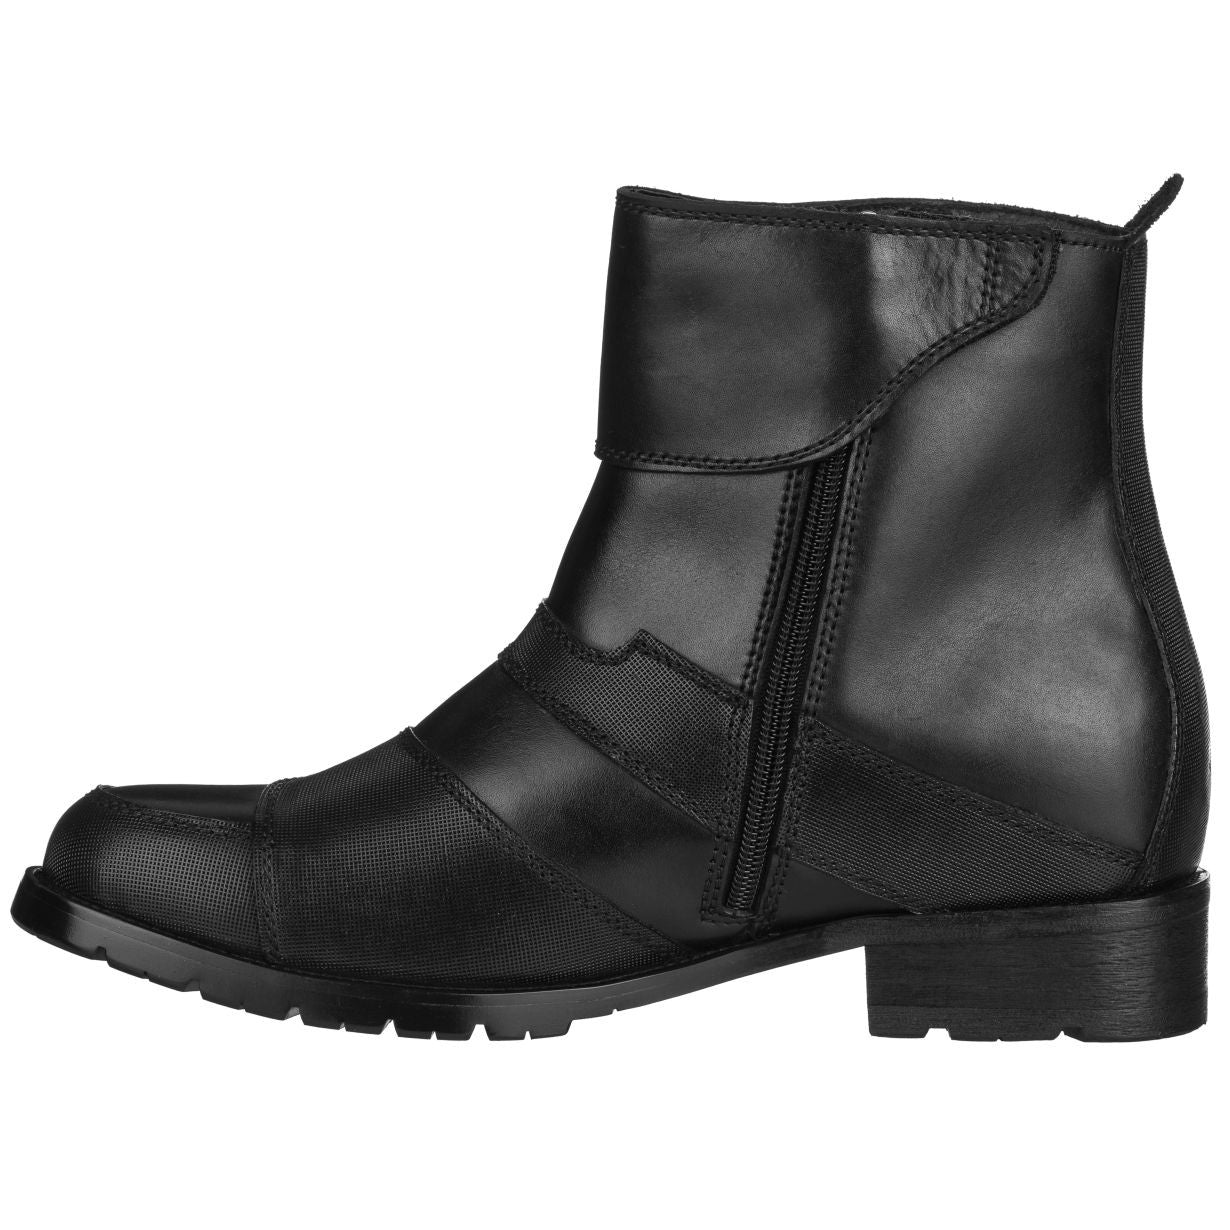 Elevator shoes height increase Black CALTO Elevator Motorcycle Boots - 3.3 Inches - G6251